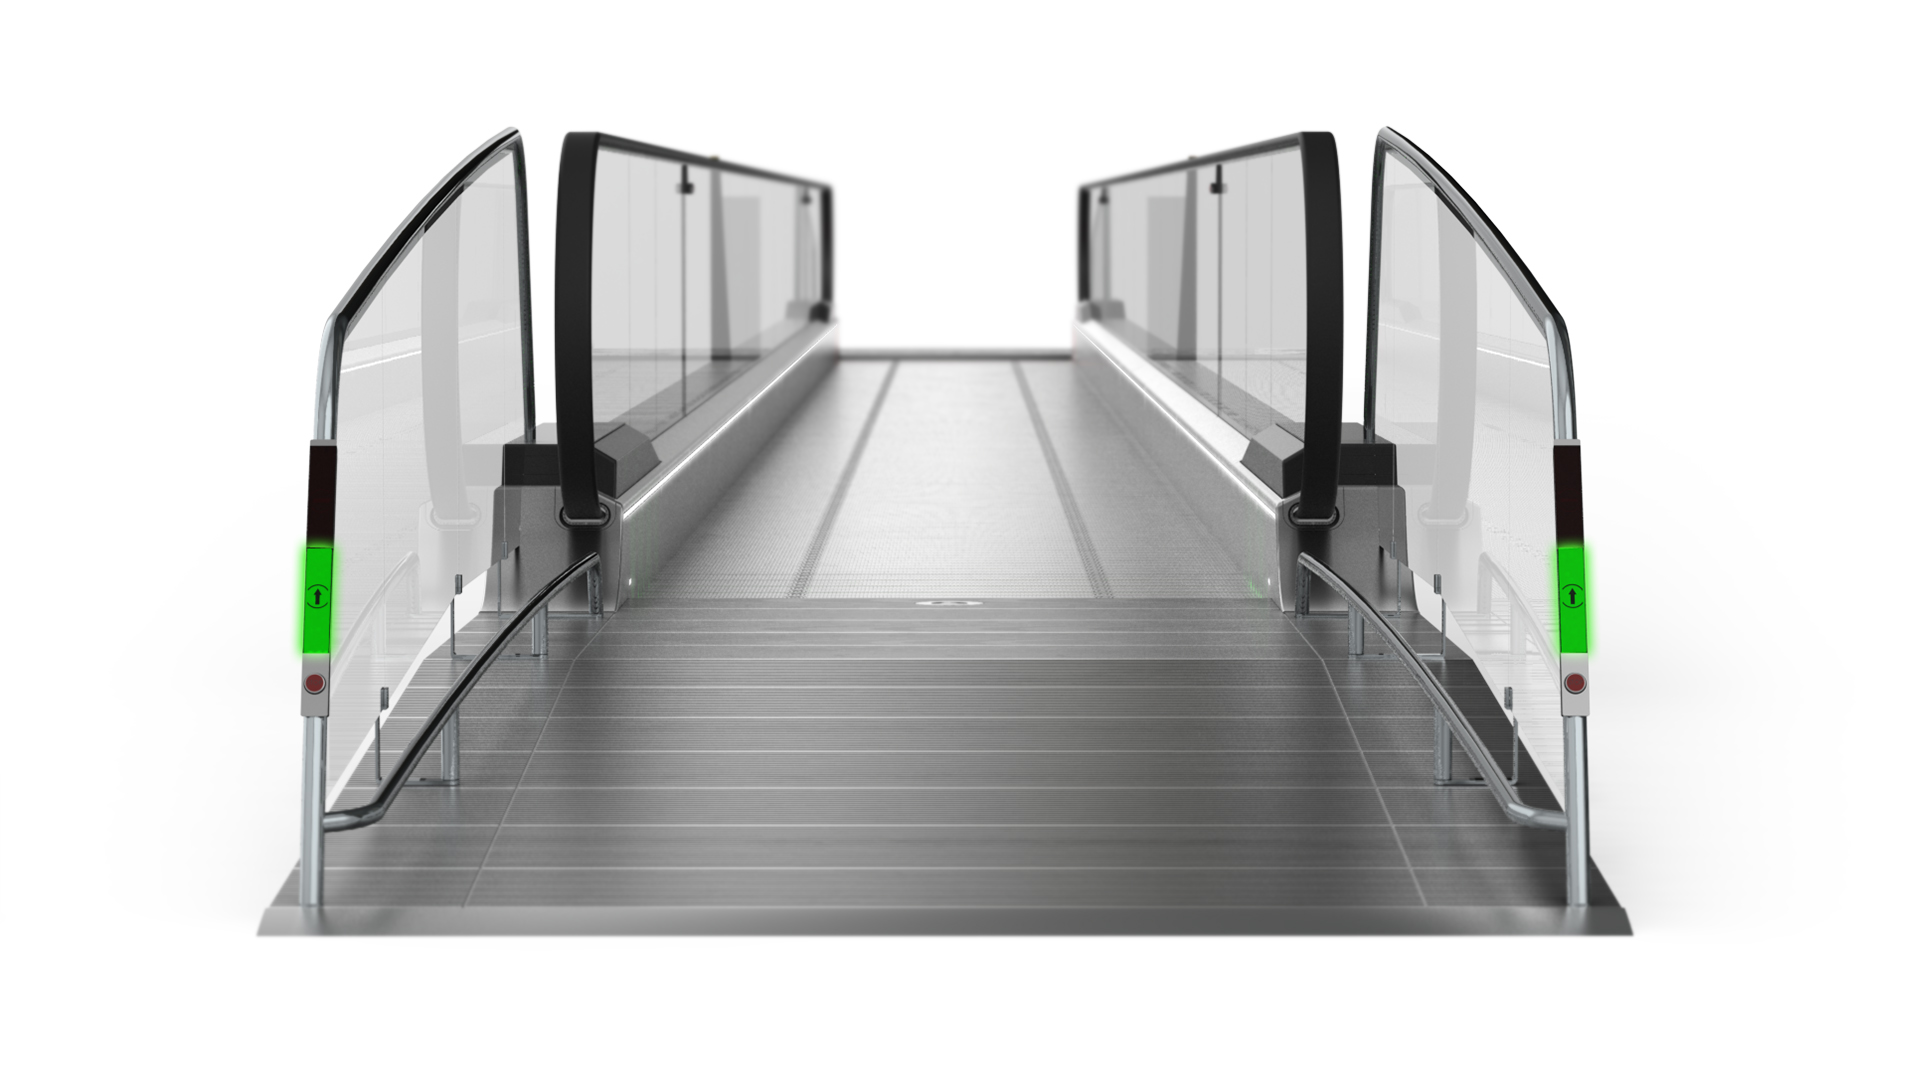 Ease, security, precision and elegance! The design language that designship GmbH developed for the Schindler moving walkway carries the passenger smoothly across the treadmill. Schindler Aufzüge AG - moving walk - passenger transport - designship GmbH - product design - industrial design - machine design - interface design - iF world design index - Top 25 Industry - Top 100 design studios worldwide - we love design